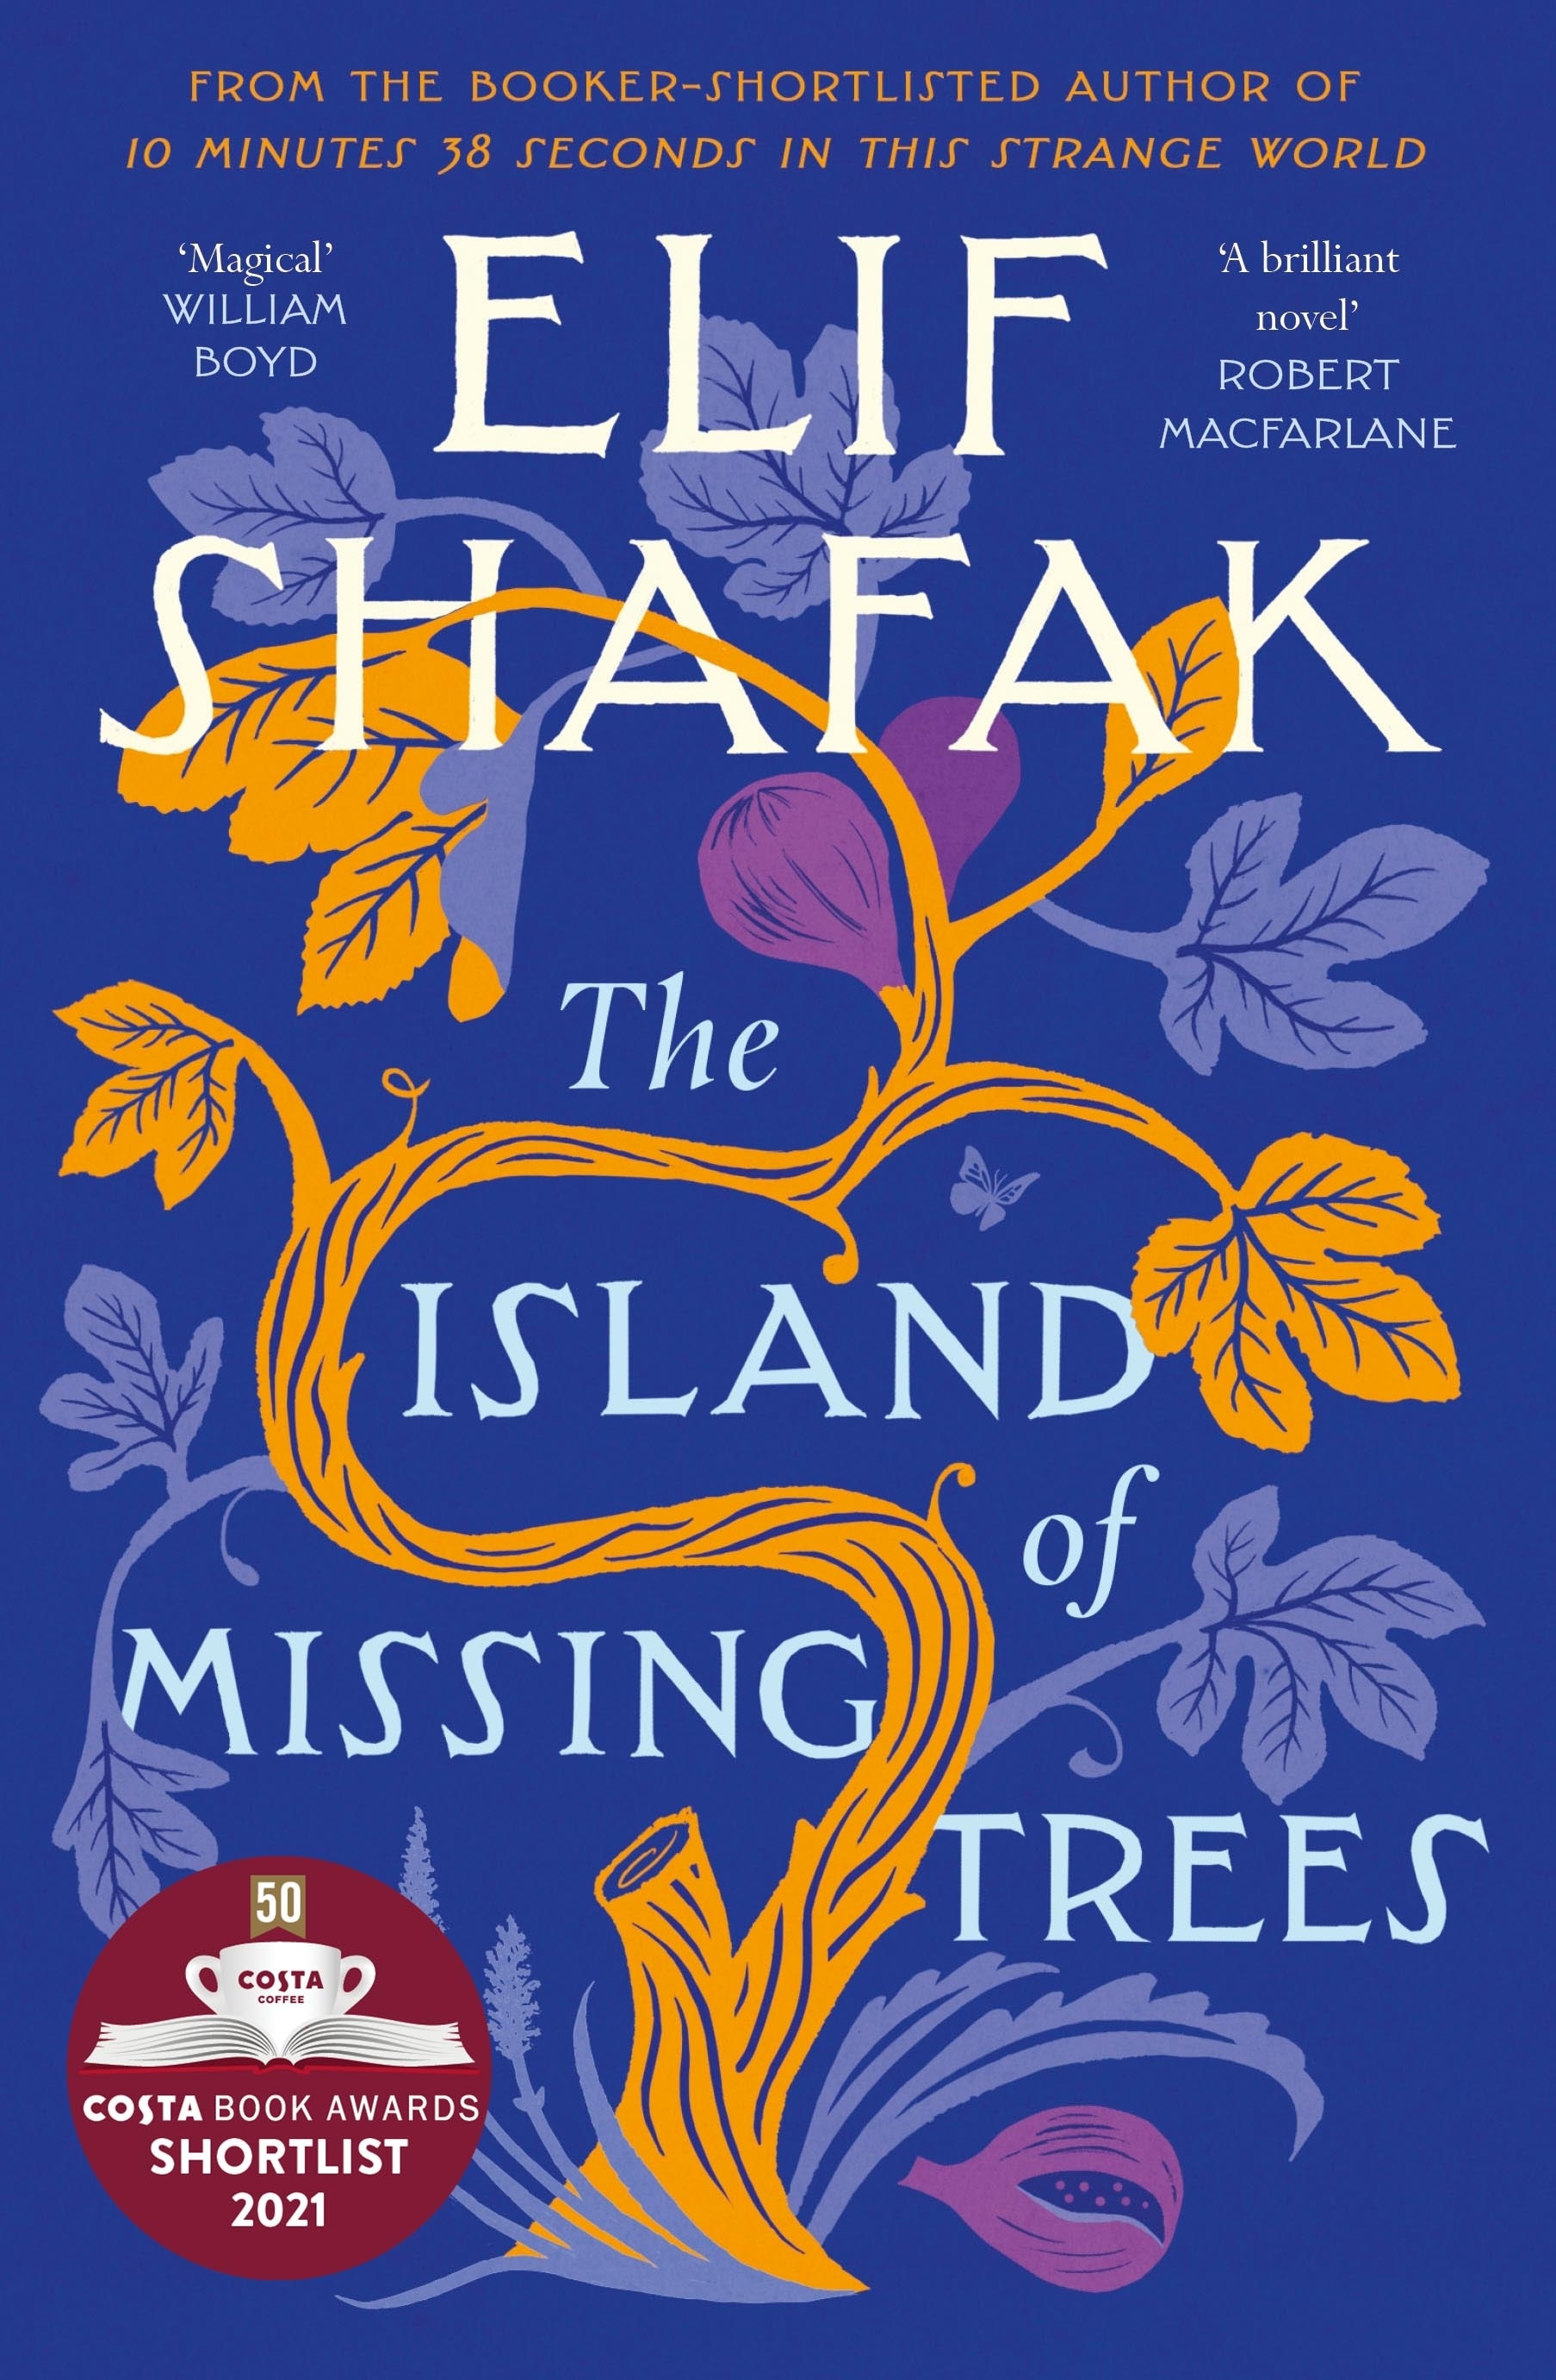 Book “The Island of Missing Trees” by Elif Shafak — August 5, 2021